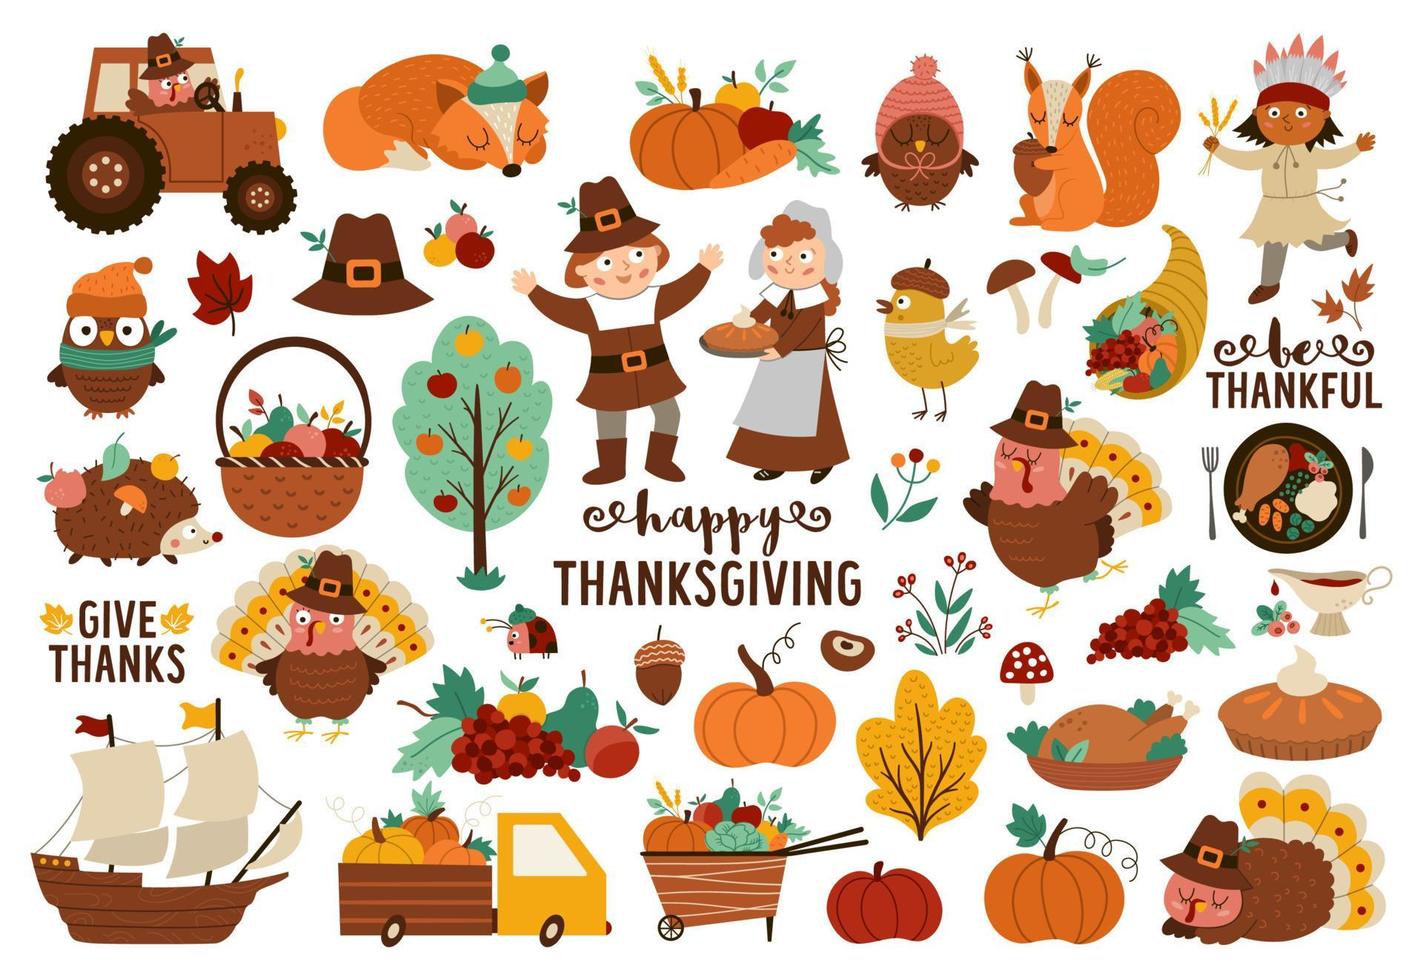 Vector Thanksgiving elements set. Autumn icons collection with funny pilgrims, native American, turkey, animals, harvest, cornucopia, pumpkins, trees. Fall holiday pack with car, tractor, phrases